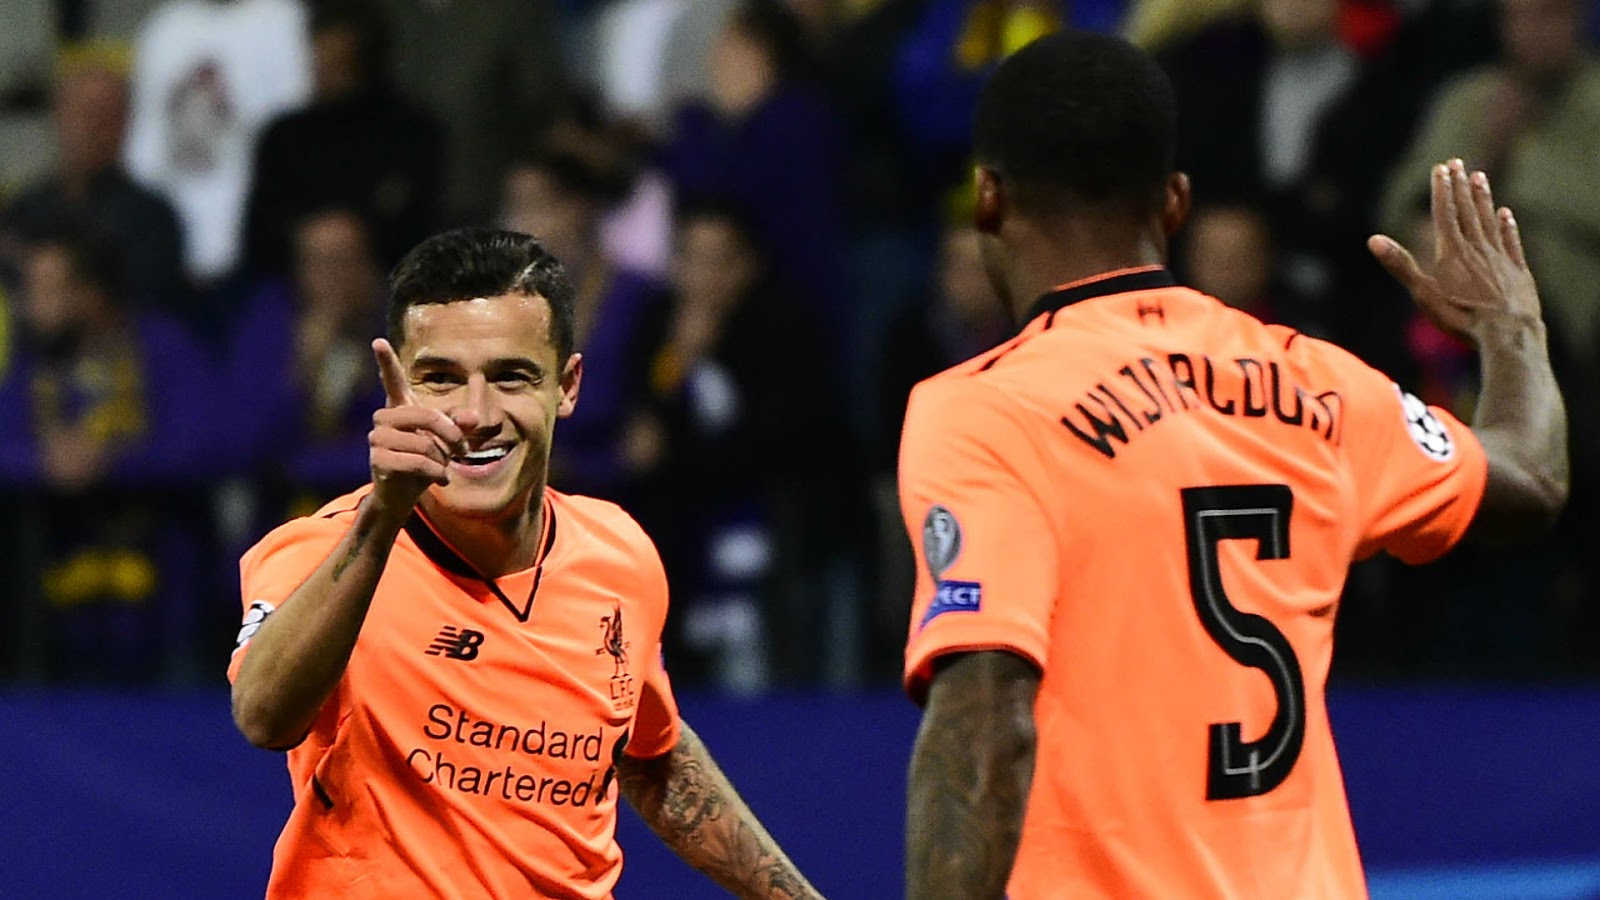 Thegoalmac Blog: COUTINHO MOVE TO BARCELONA UNLIKELY IN JANUARY